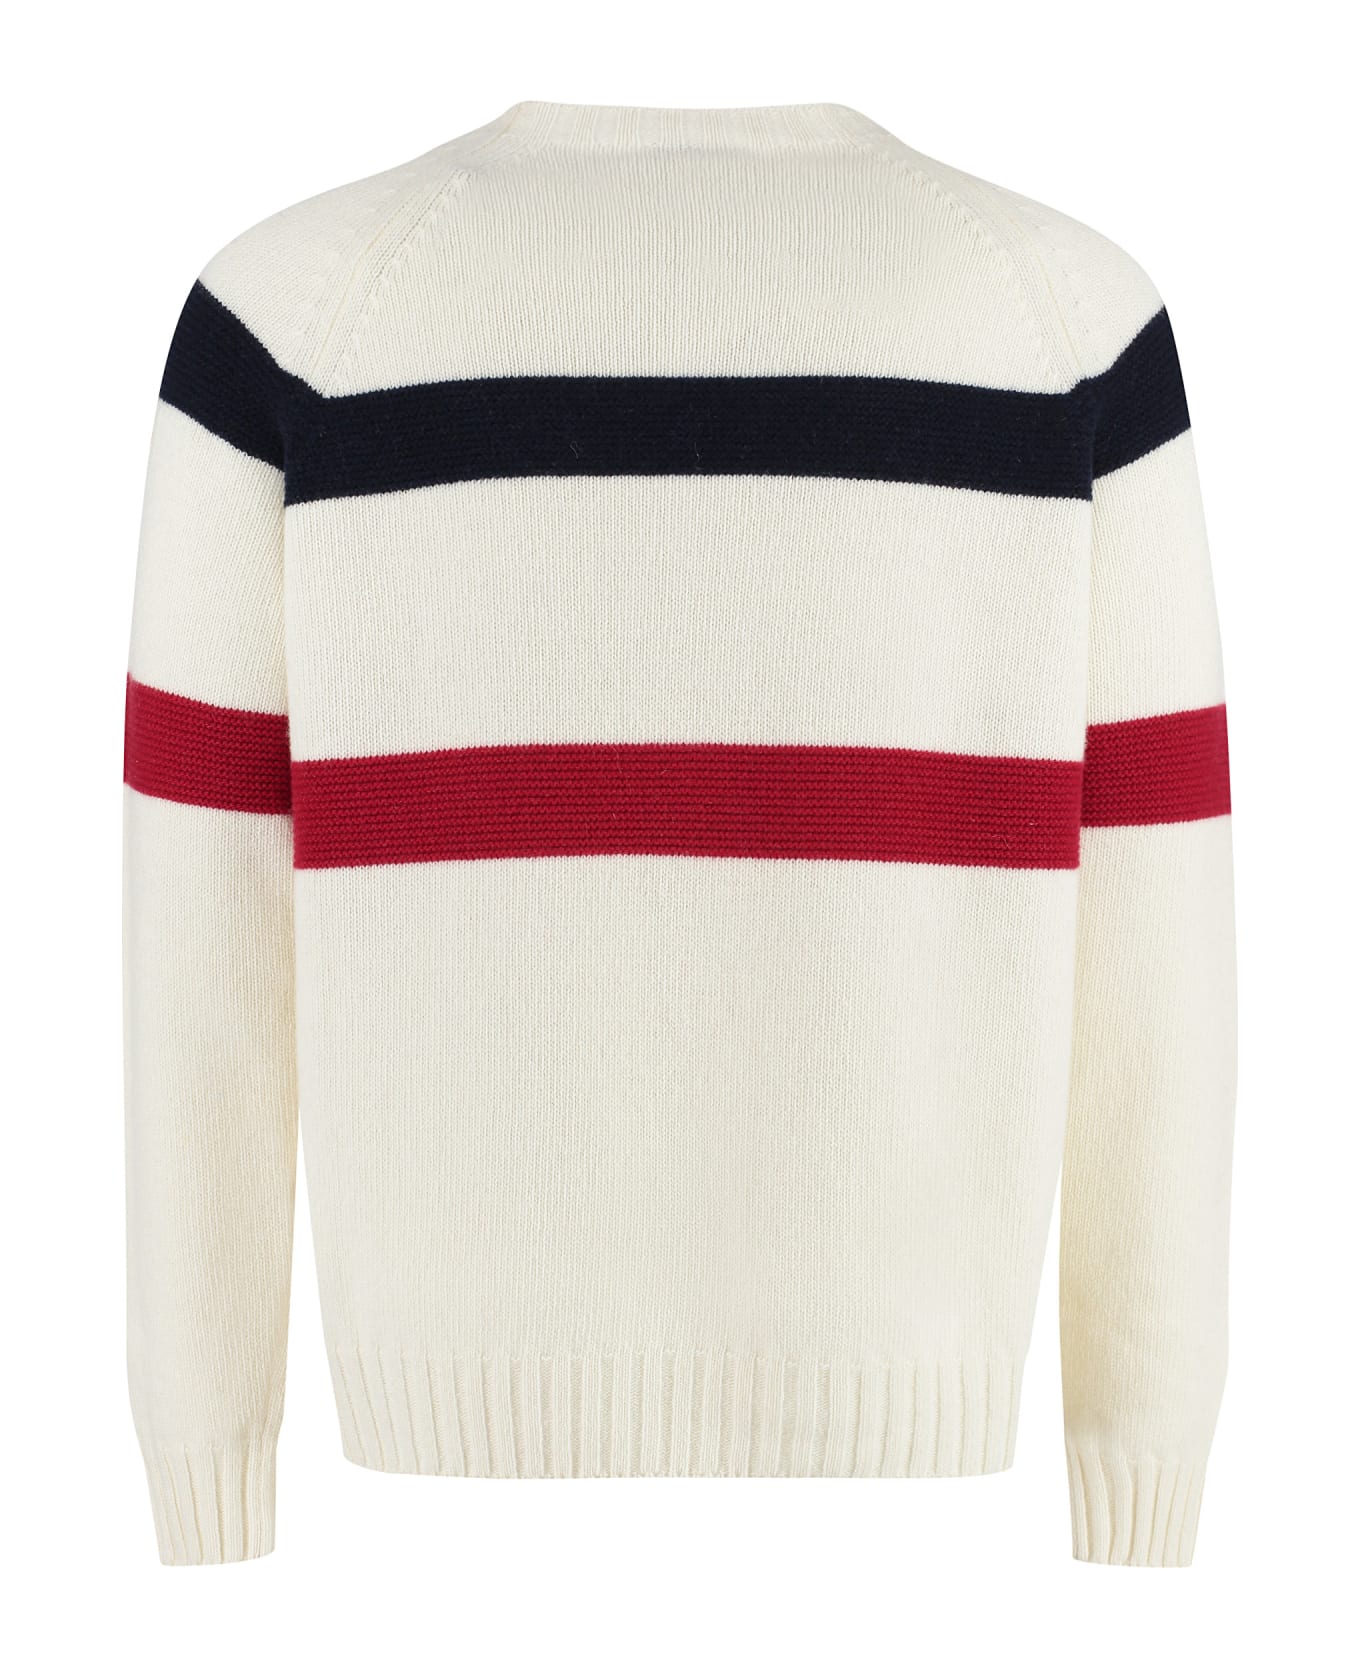 Moncler Genius Wool And Cashmere Sweater - Multicolor